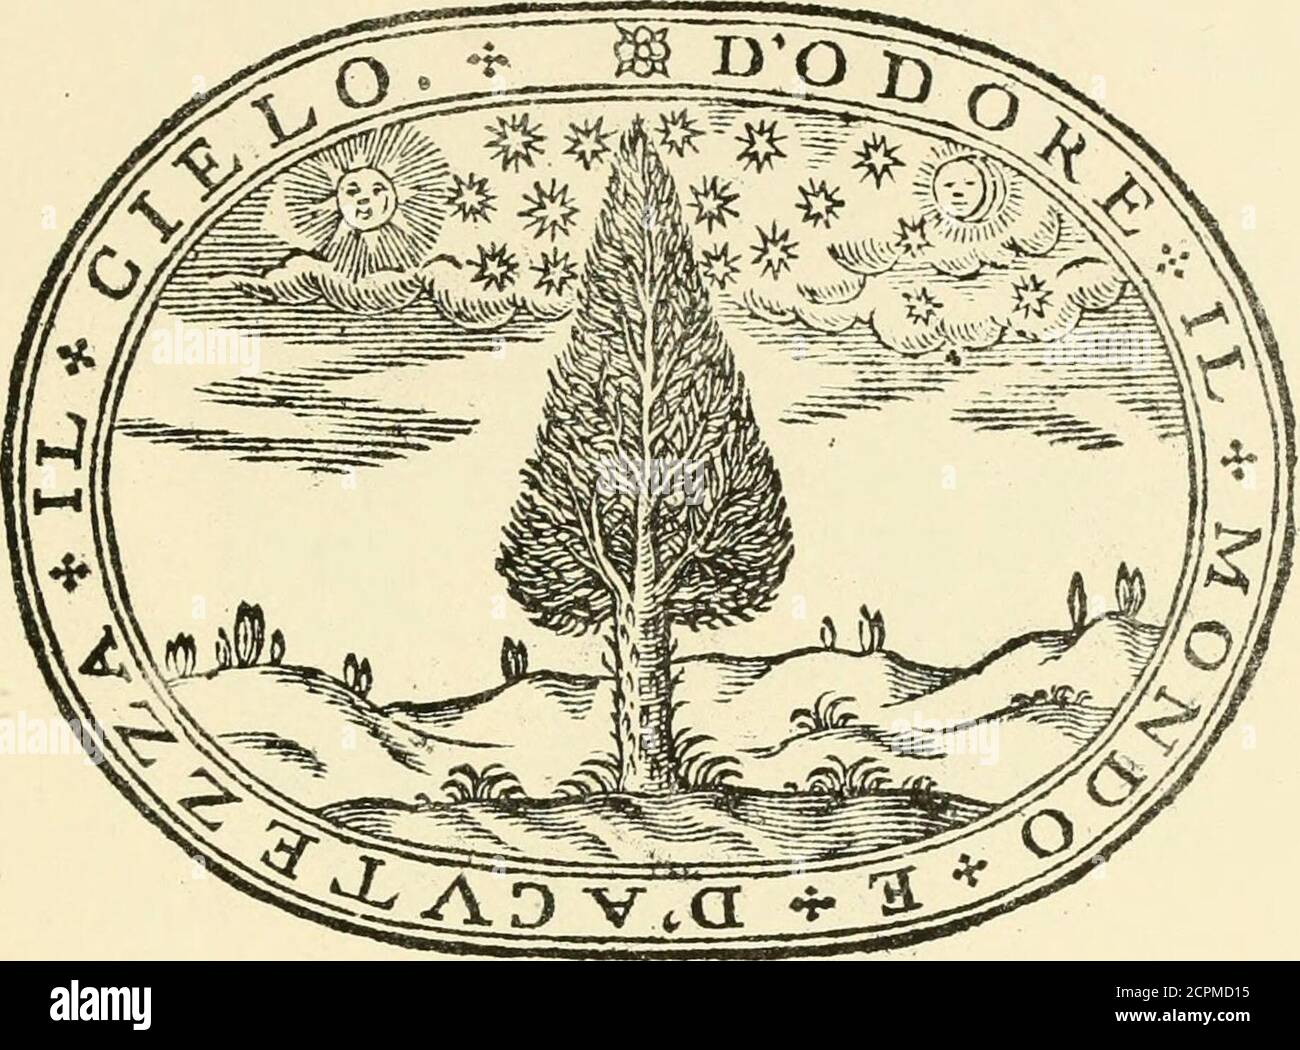 . The mirrovr of maiestie: or, The badges of honovr conceitedly emblazoned. A photo-lith. fac-simile reprint from Mr. Corser's perfect copy. A.D. 1618 . Tls trucjvour vaiions Be^dthus quaiterlyDcftiribdjpoynts out the gi cat anticjuitic,O^Honour^ and oU^critie cnicly claimdBy You^whohauc prcfcrud them free, vninaimd.Let none thats generous thinke his time ill ipcnt,Tq imitate your ^i^r/Zj {b eminent. 3r EMBLEME it.. I He T)w/^ whole happincfle, and cheifc delight,^ Naymore^whofe mfedomeliesin ^pphtiCyRatlier then Kni?n^lrdge-jChlmes the largeft iliarcOf that which pleafcth moft: nor doth it ca Stock Photo